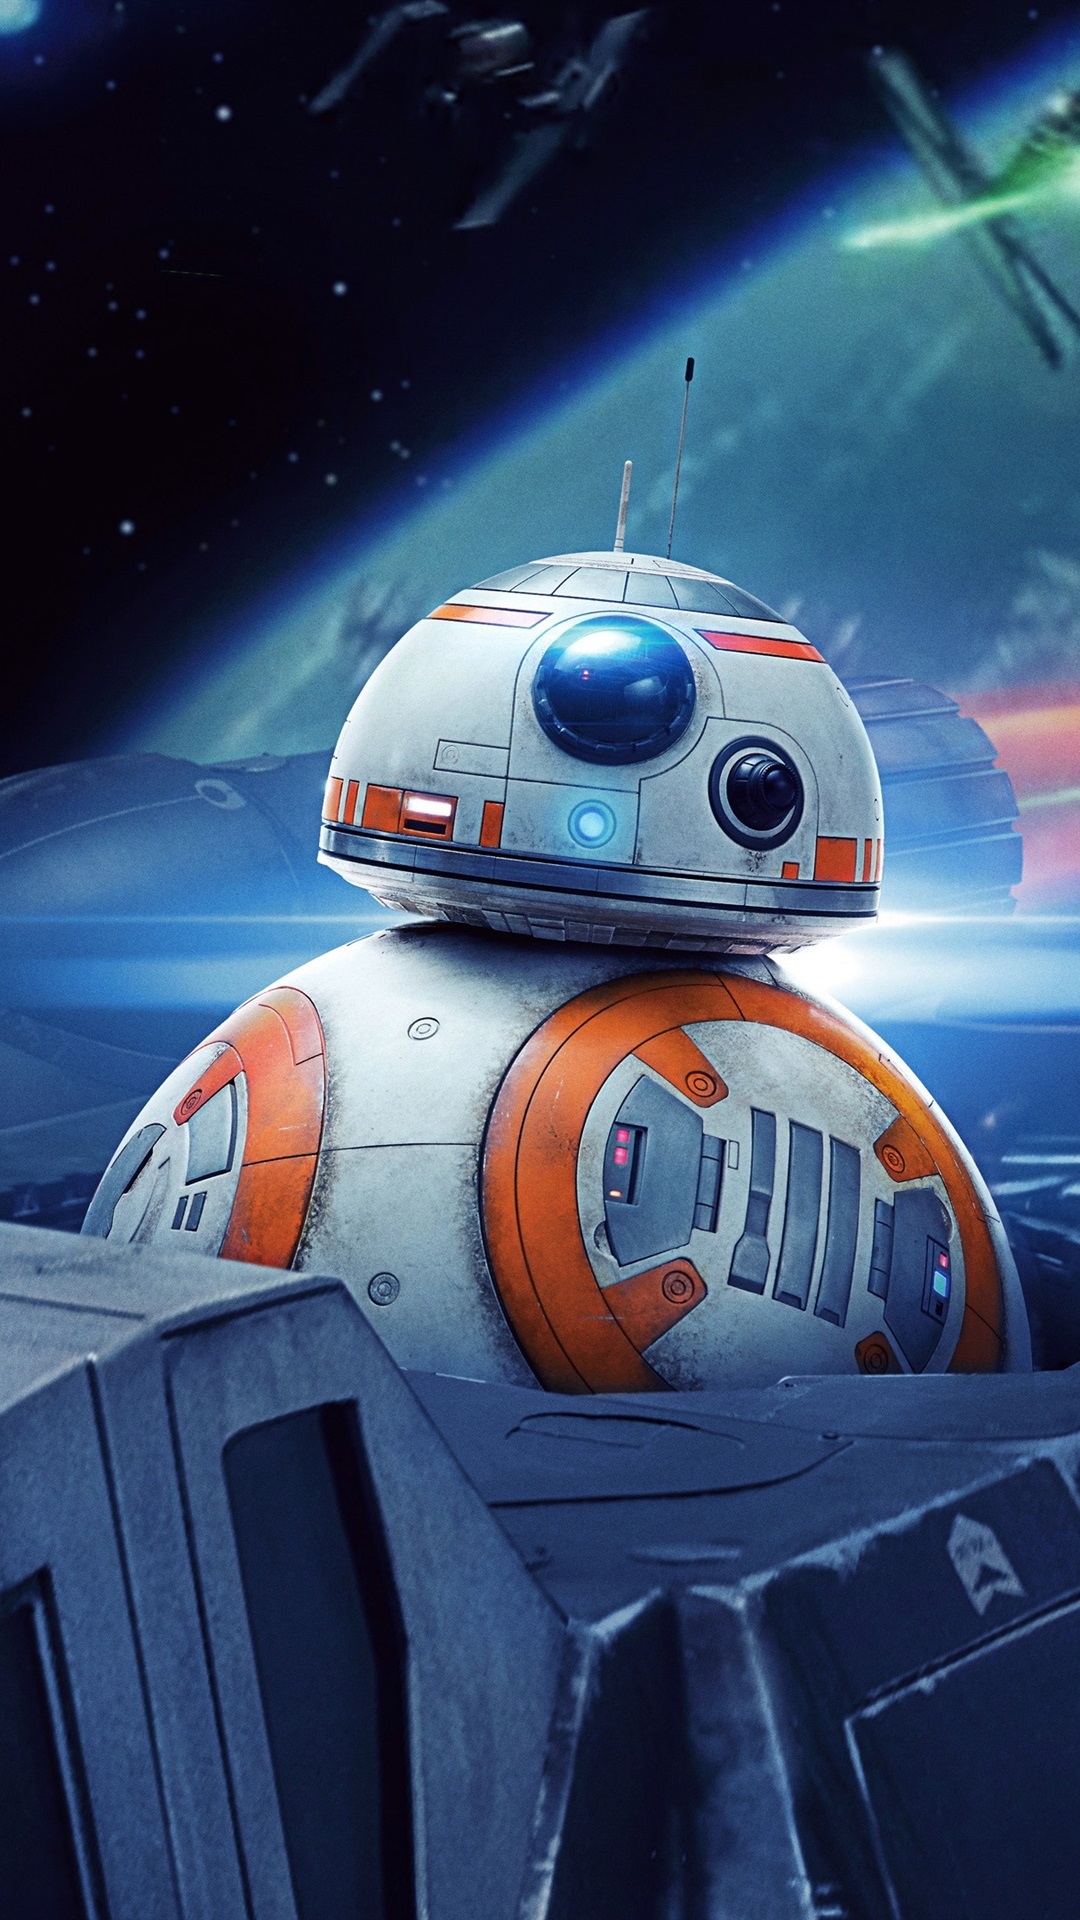 bb8 iphone wallpaper,r2 d2,outer space,mode of transport,vehicle,space